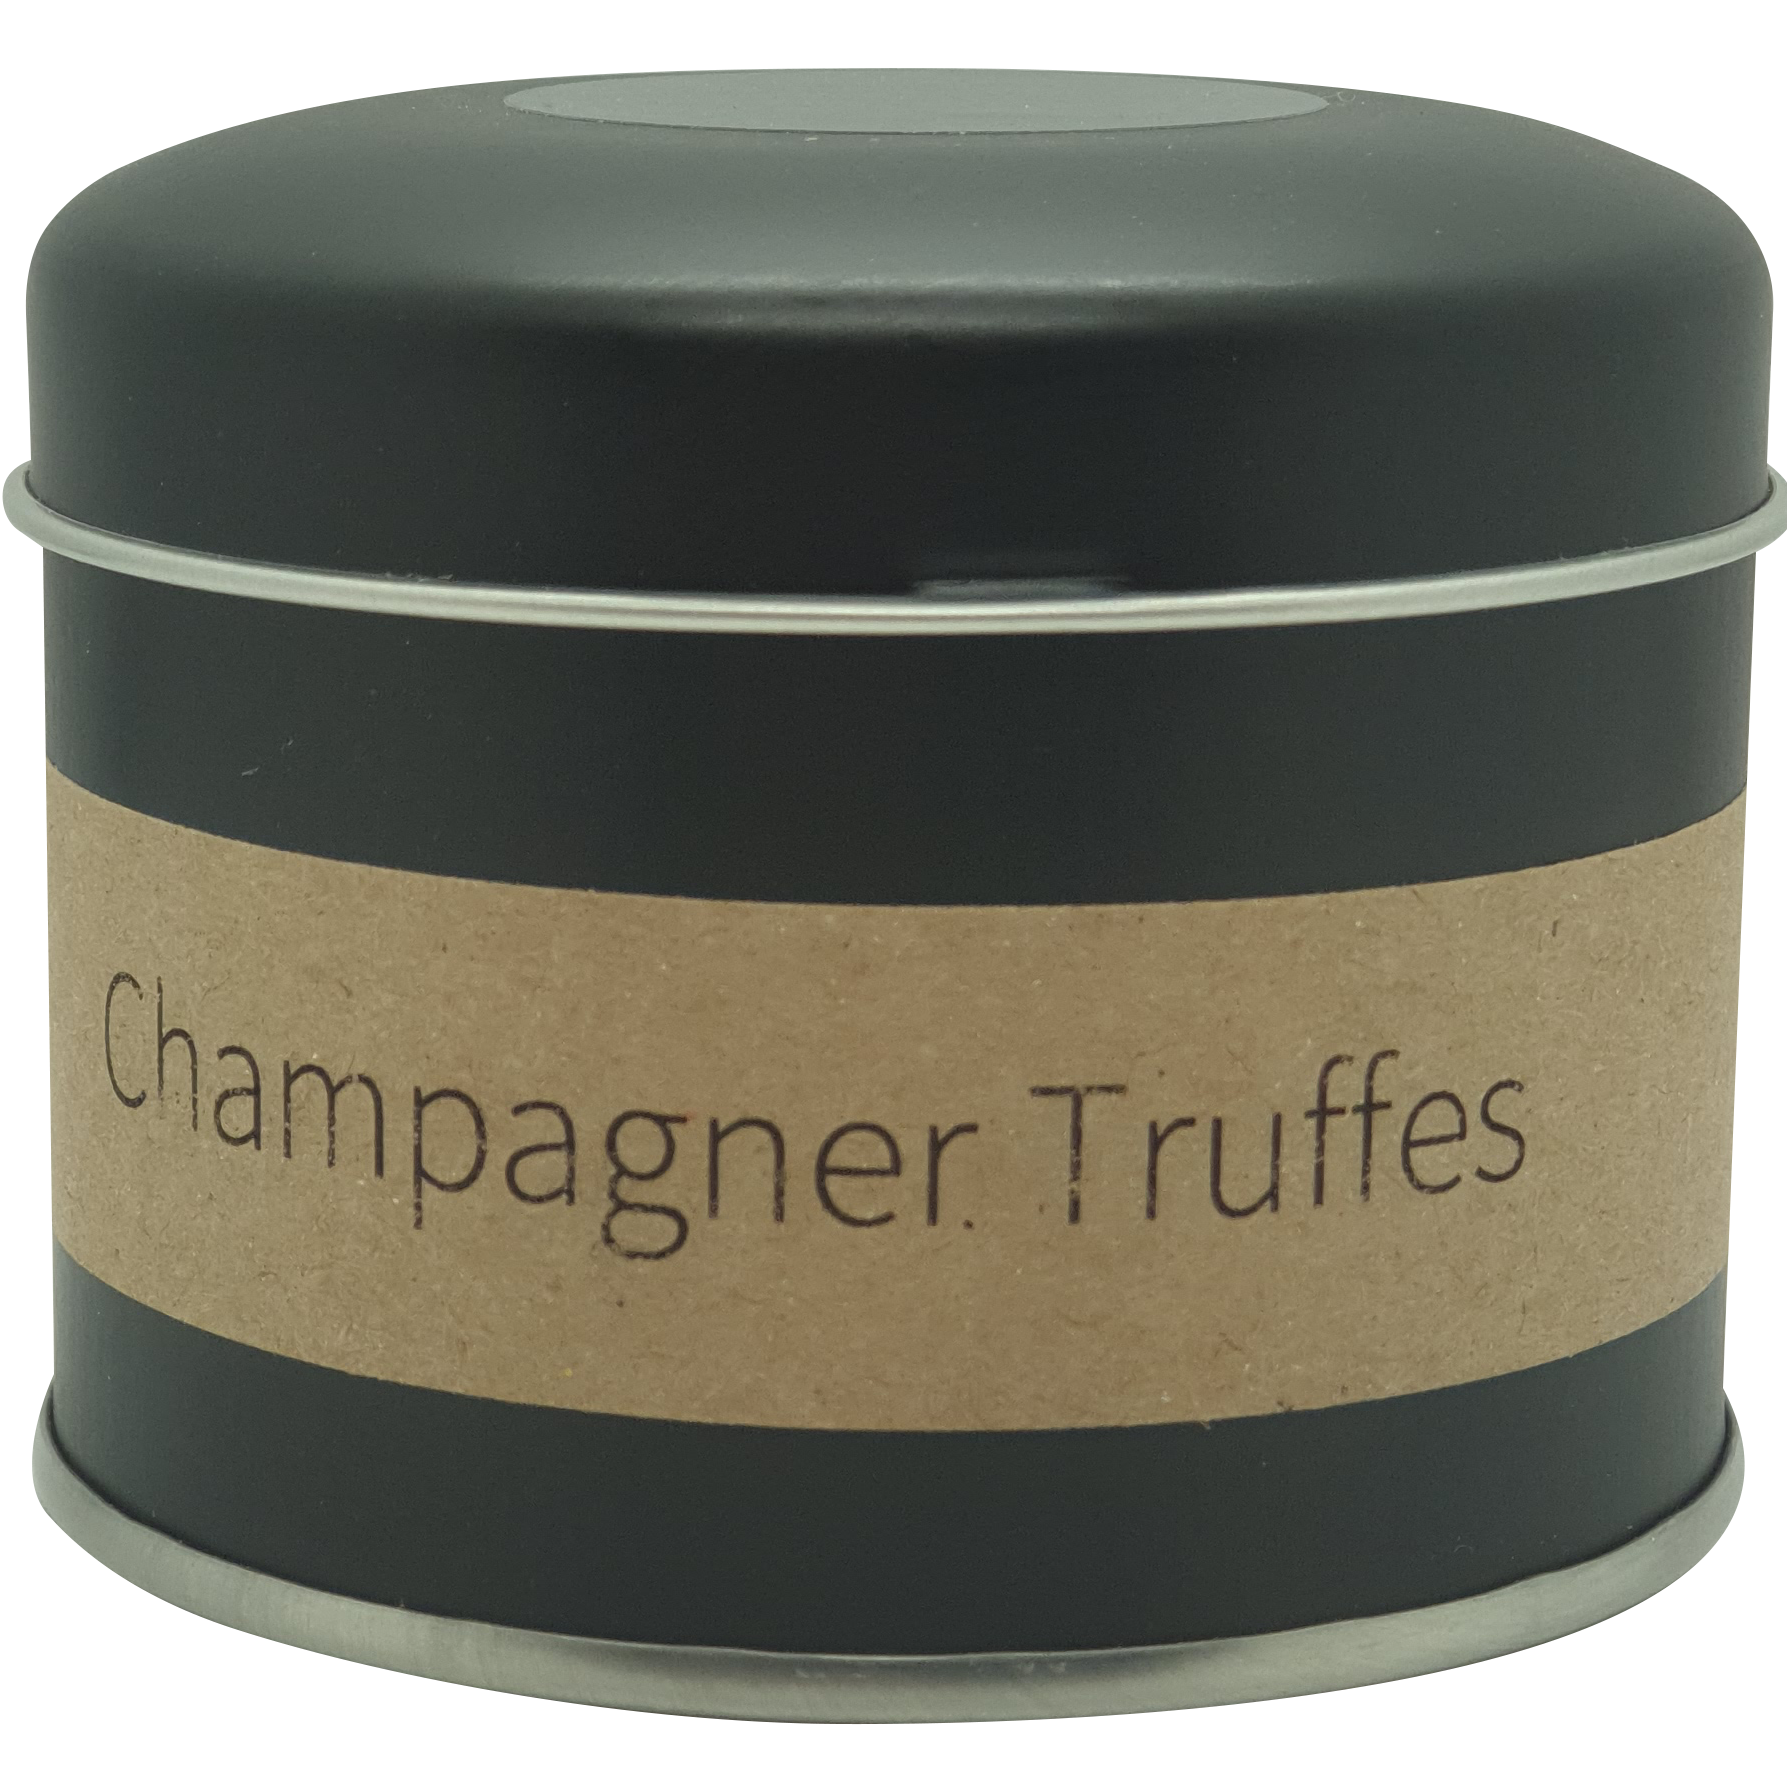 Image of Champagner Truffes - 110g